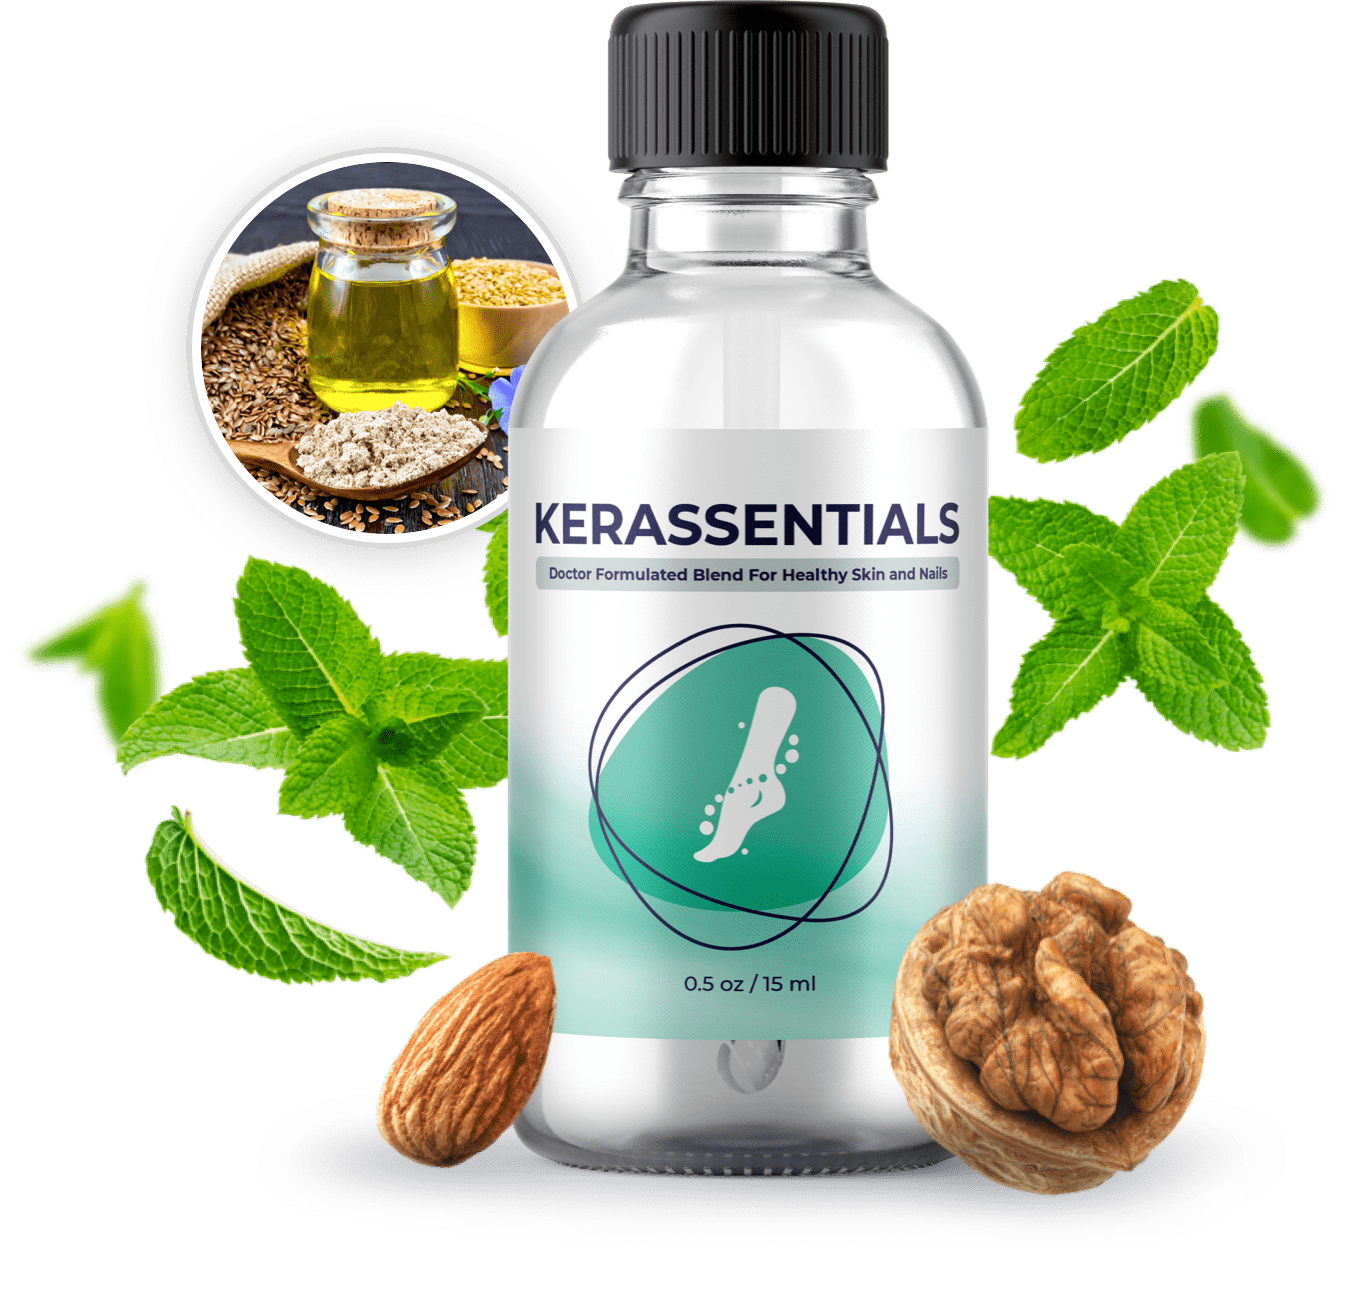 Kerassentials Fungus Oil: The Ultimate Solution for Fungal Infections